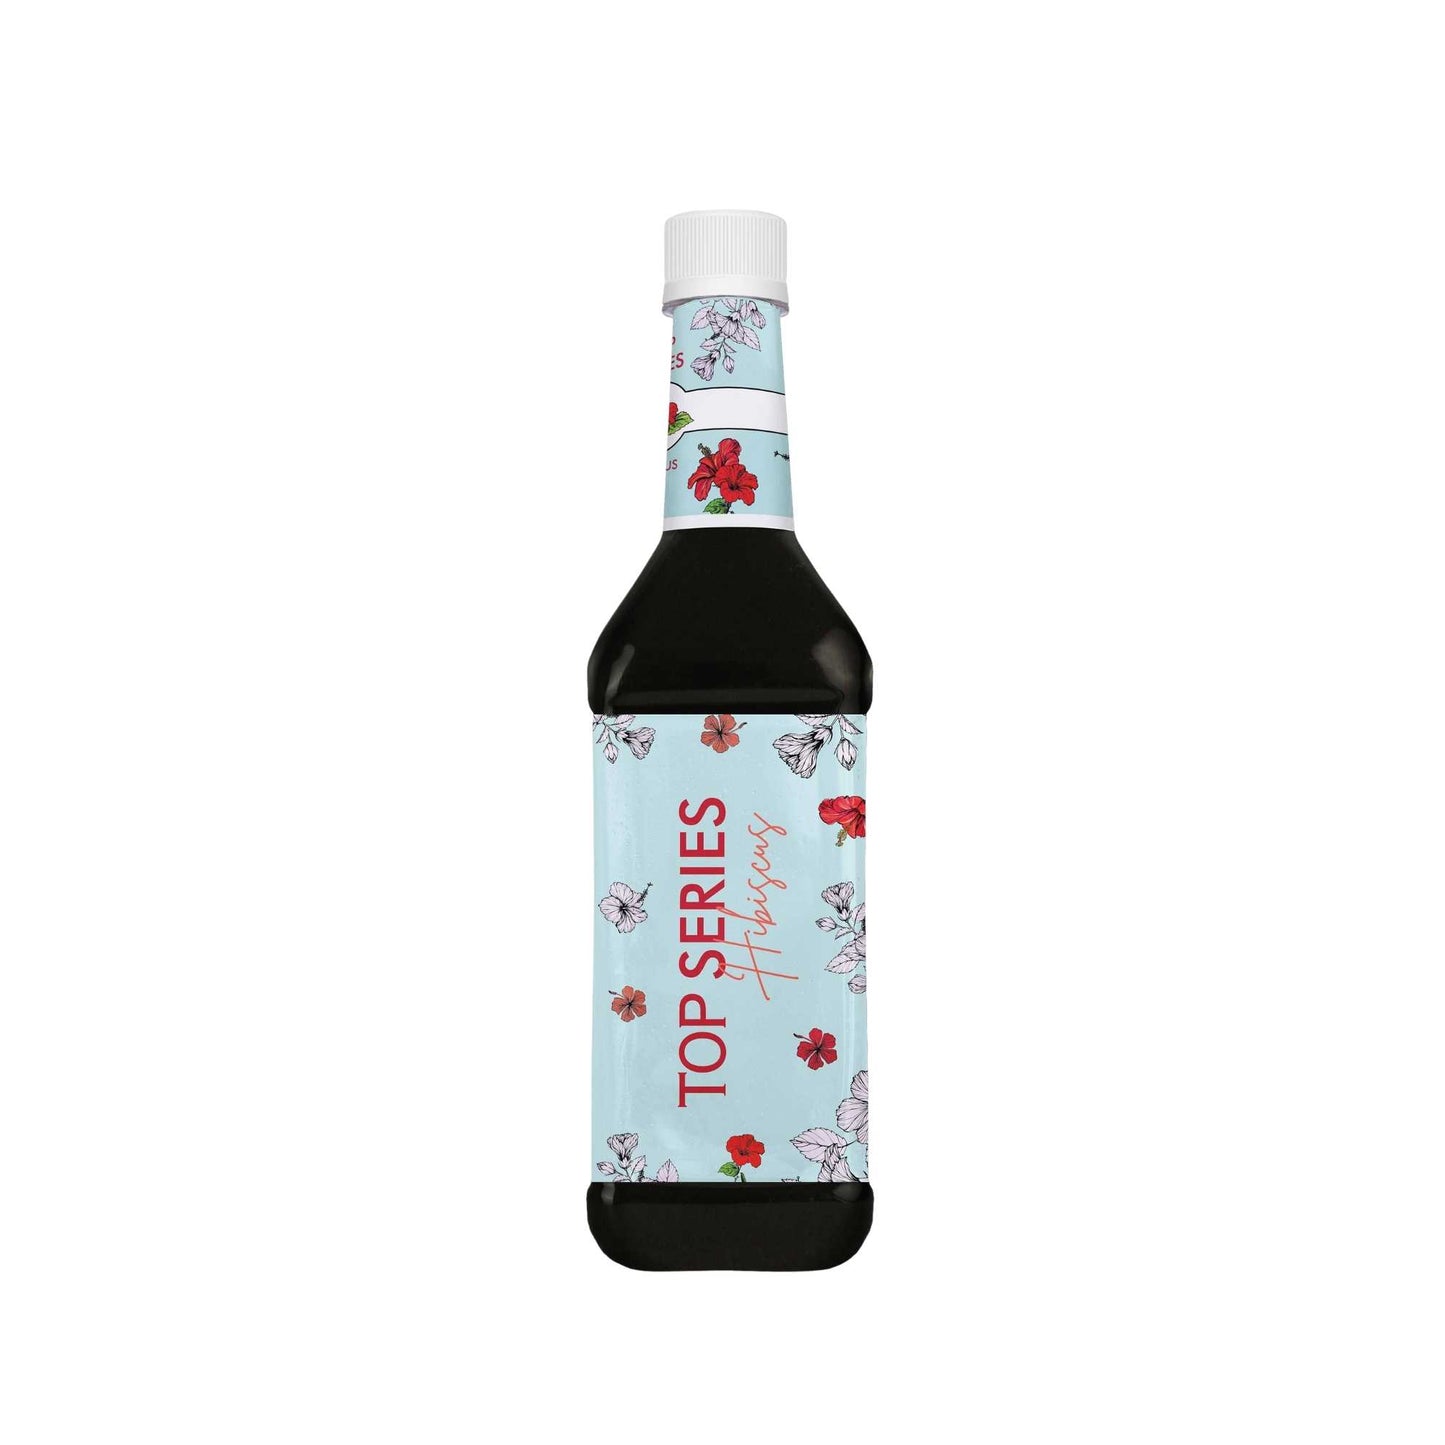 TOP Creamery Top Series Hibiscus Syrup 750ml